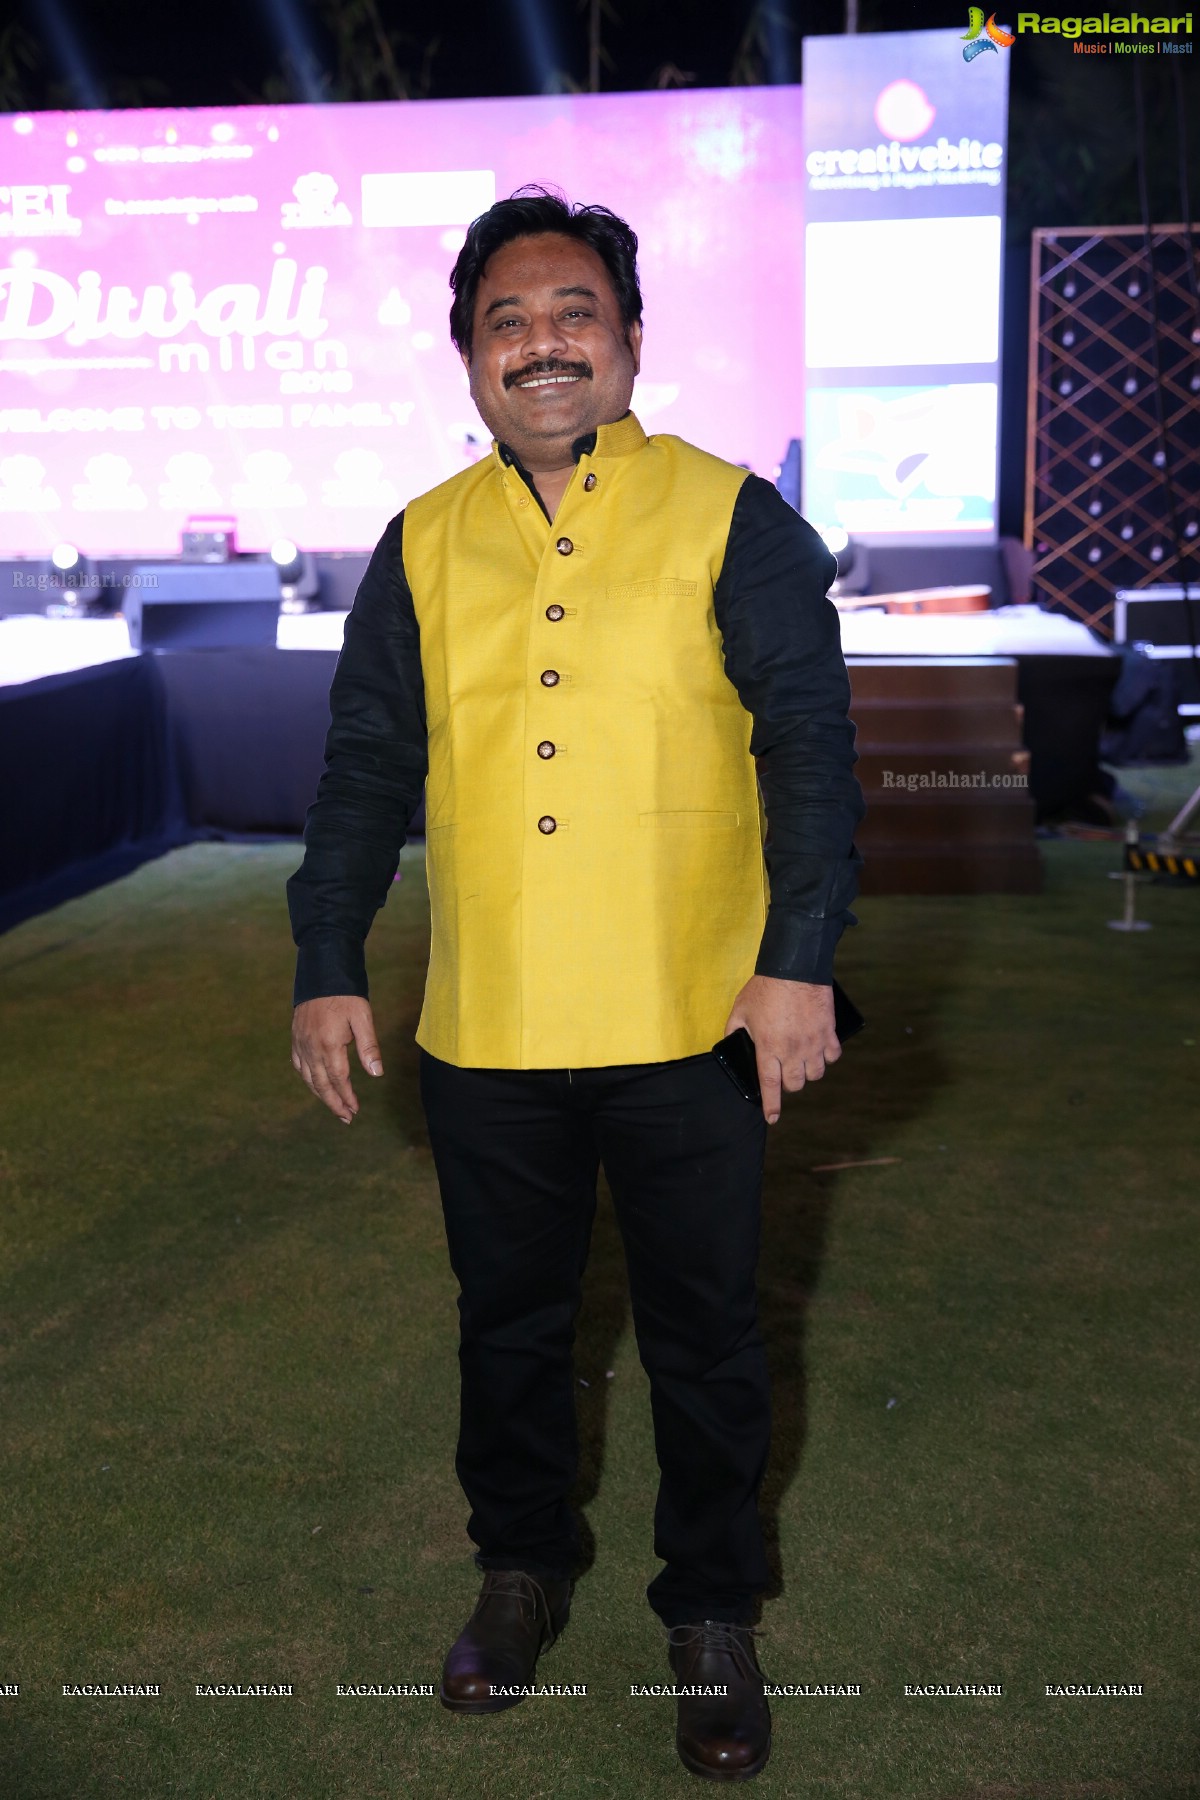 TCEI - Diwali Milan - 2018 at SNC Convention Attapur, Hyderabad